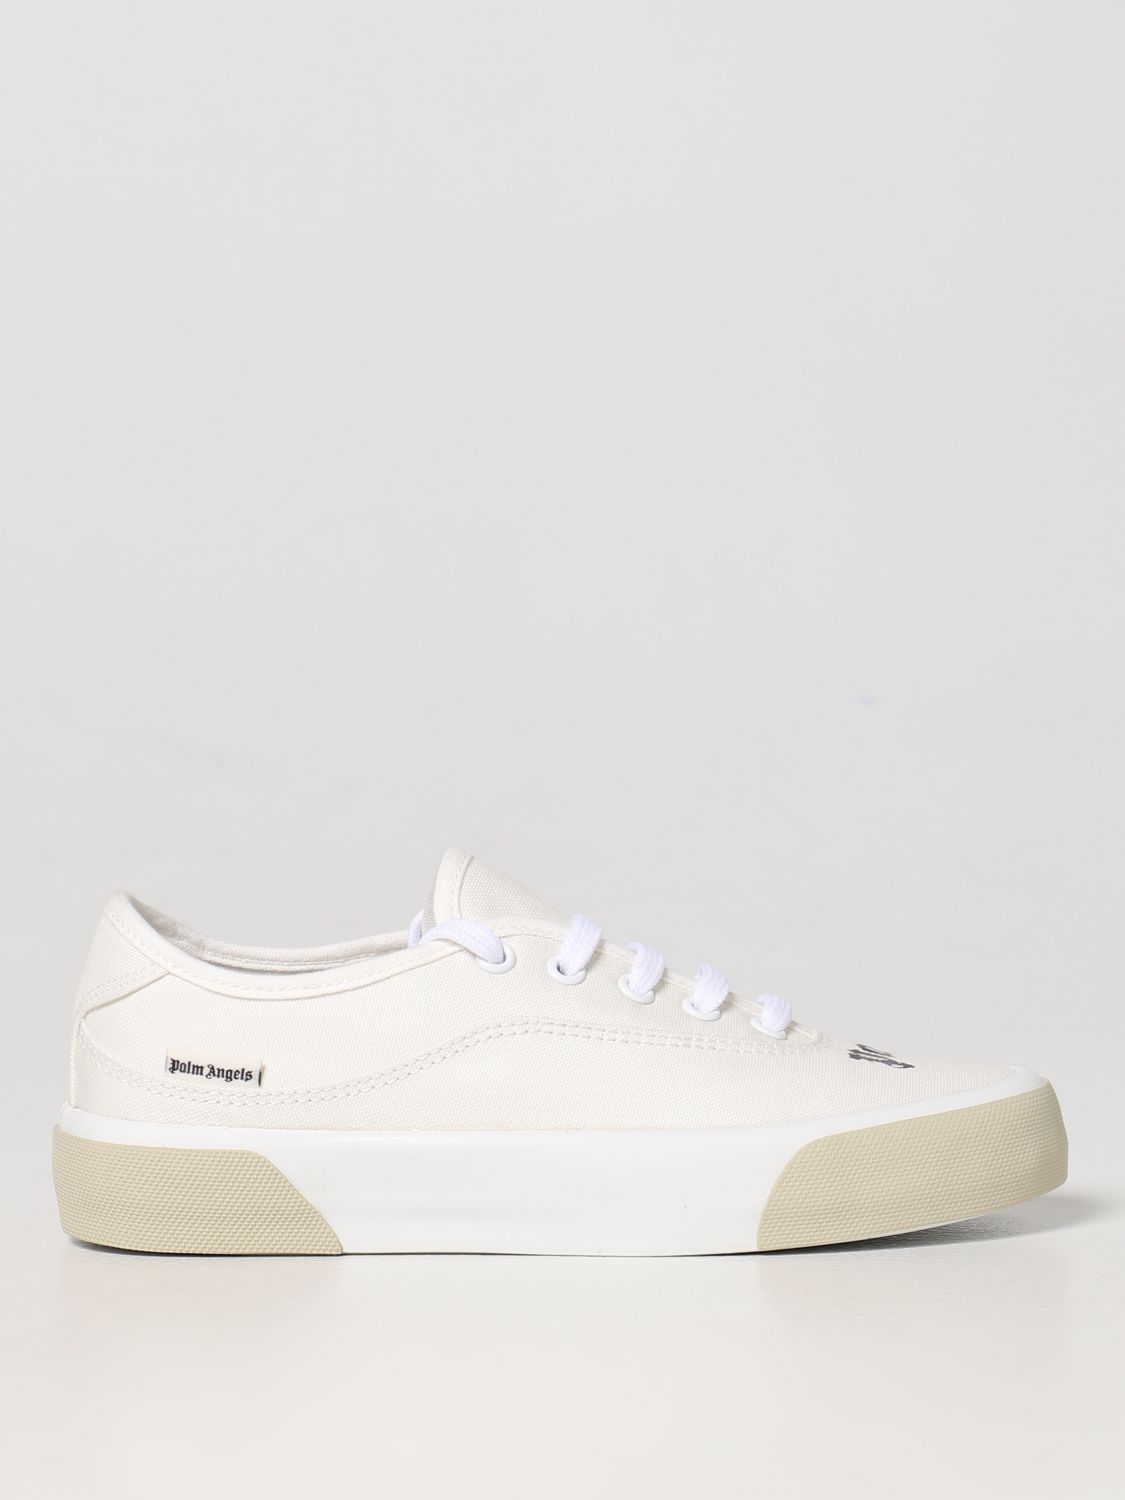 Palm Angels Outlet: sneakers for woman - Yellow Cream | Palm Angels ...